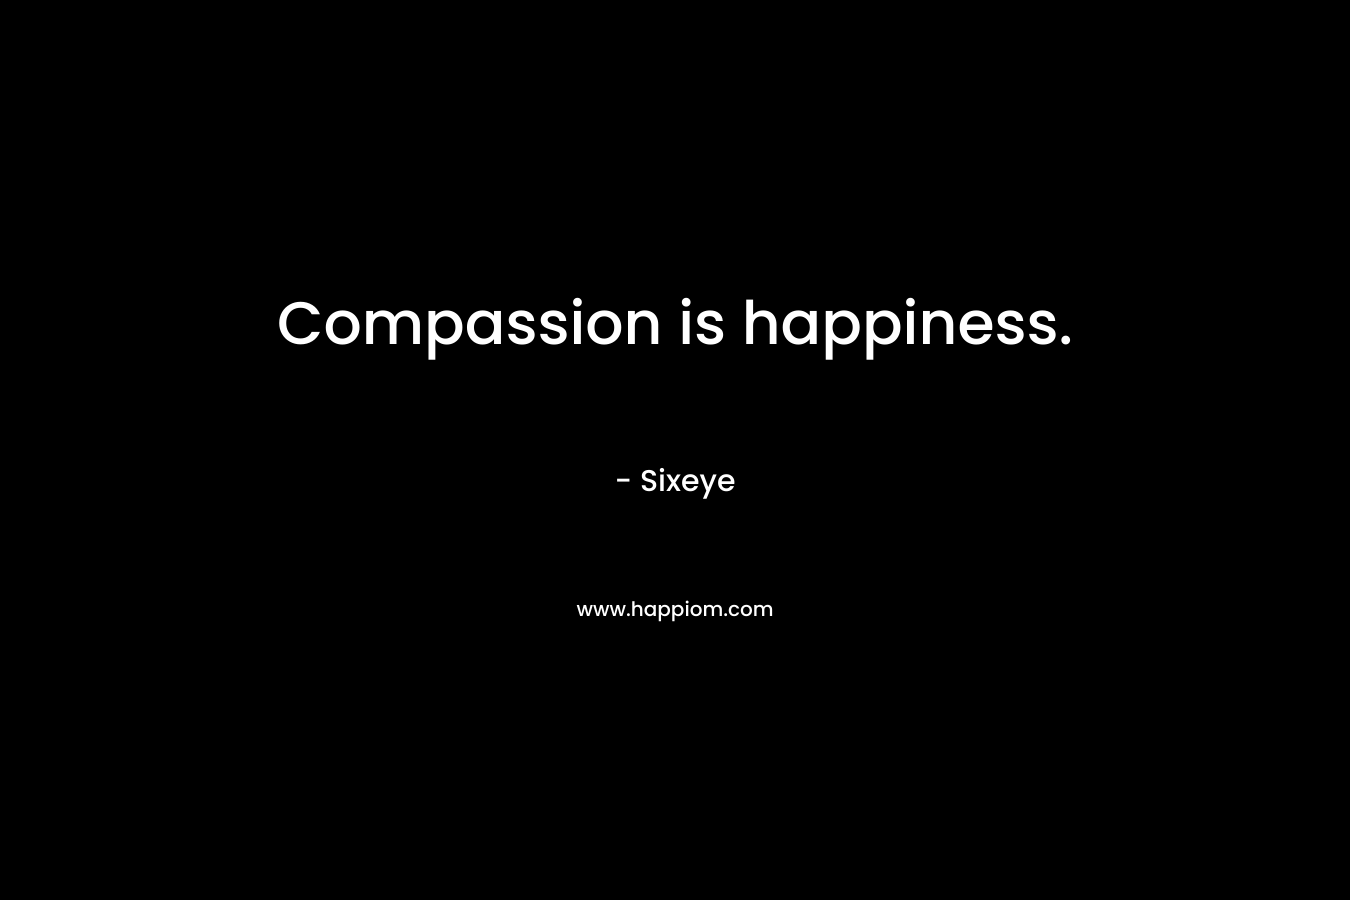 Compassion is happiness. – Sixeye